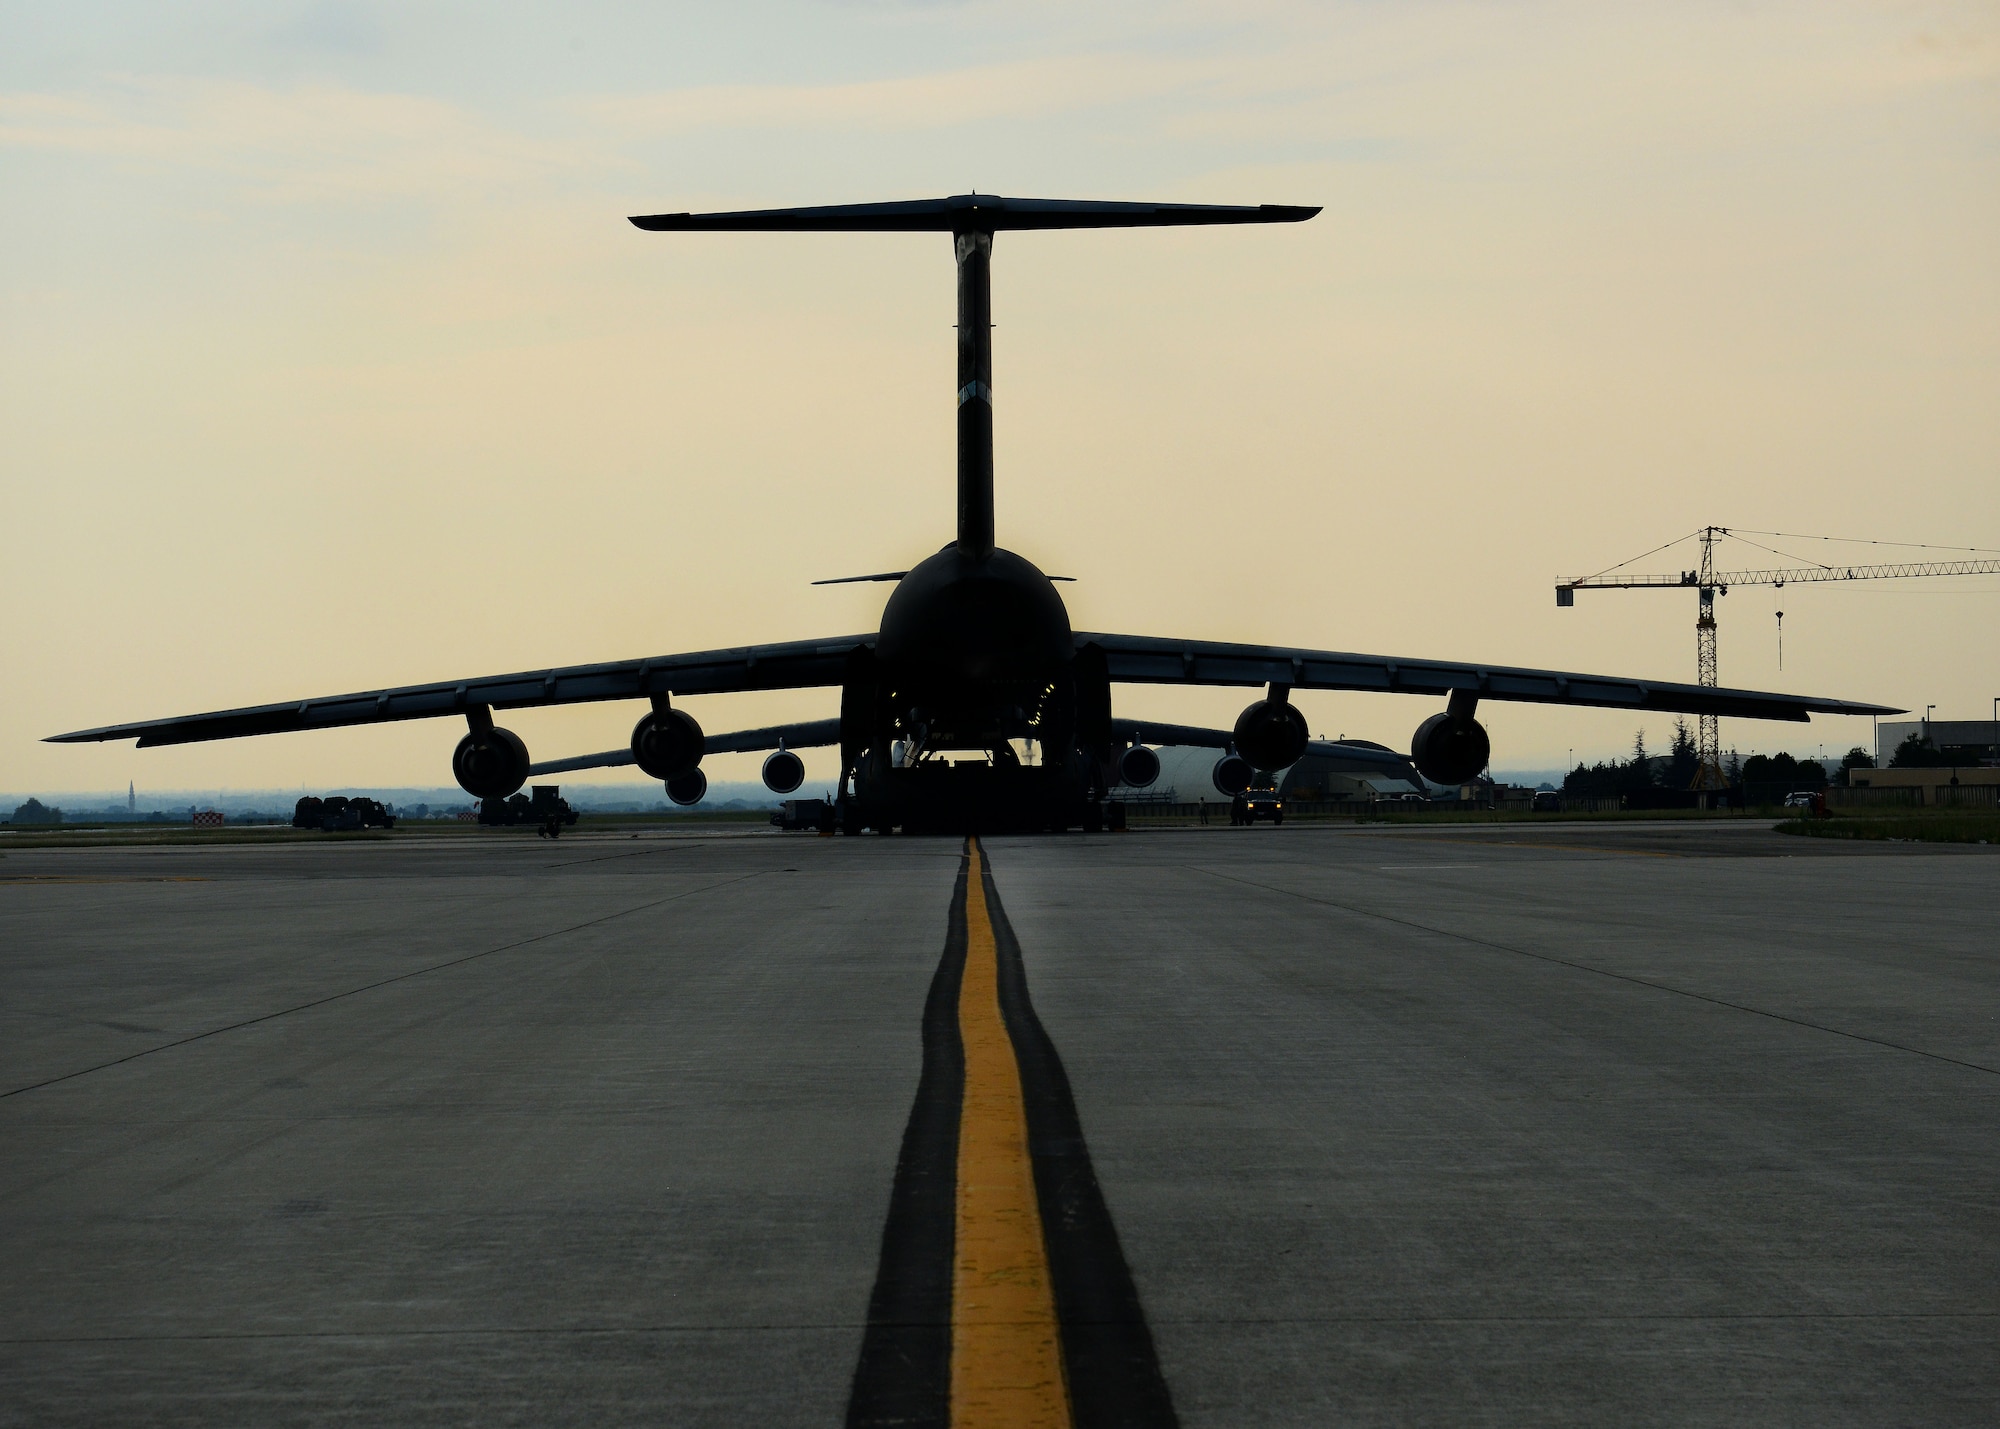 Cargo is loaded onto a C-5 Super Galaxy from the 436th Airlift Wing Aug. 8, 2015, at Aviano Air Base, Italy. The cargo will be delivered to Incirlik Air Base, Turkey, in support of Operation Inherent Resolve. This deployment coincides with Turkey's decision to host U.S. aircraft to conduct counter-ISIL operations. (U.S. Air Force photo by Airman 1st Class Deana Heitzman)